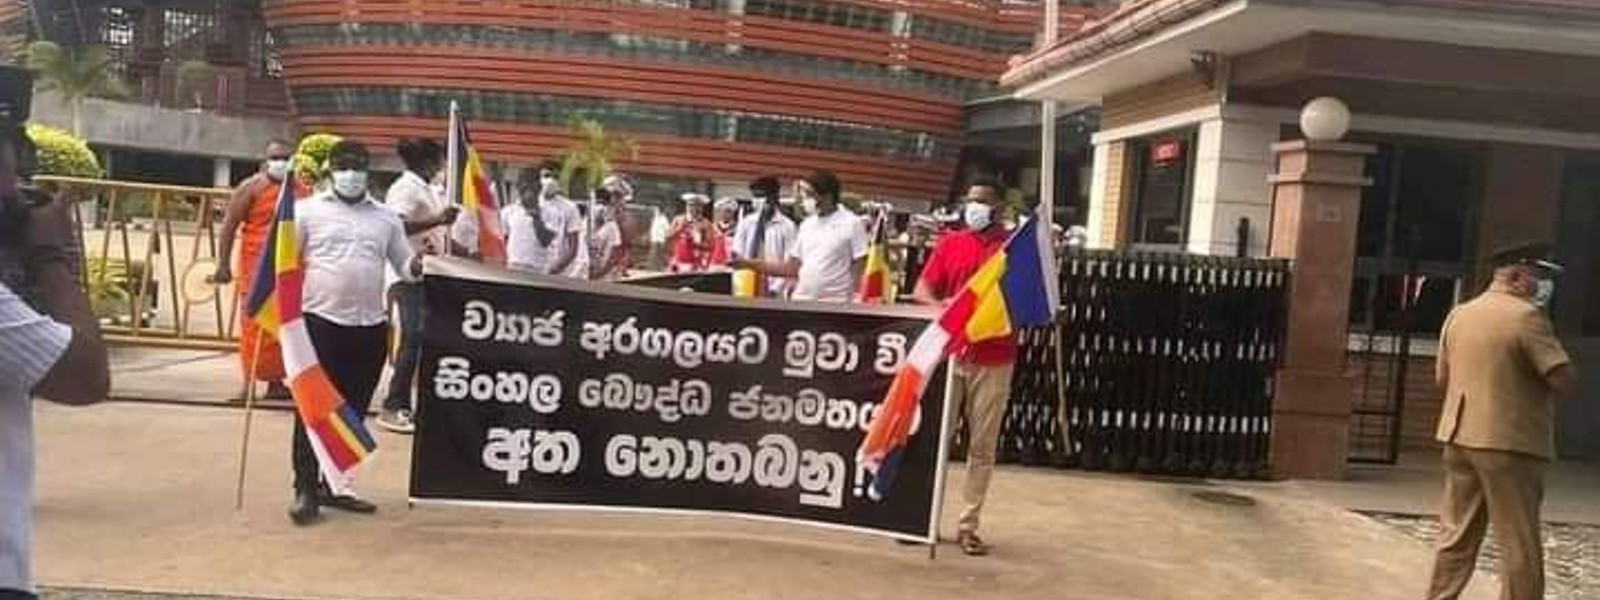 “Do not place a hand on Sinhala Buddhist Mandate” protest staged